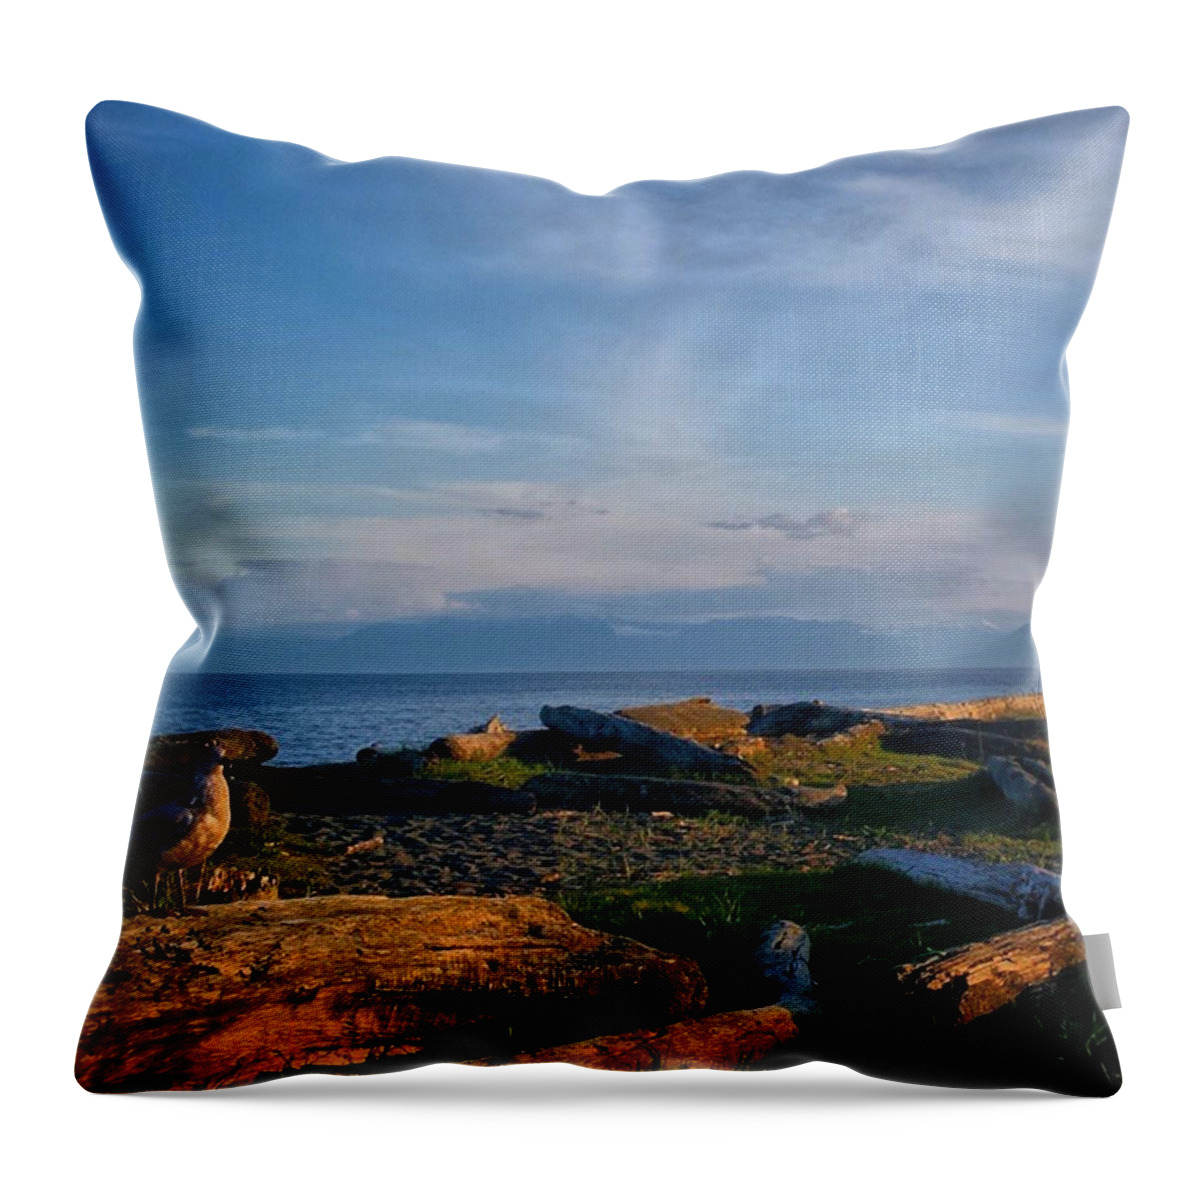 Lovetheview Throw Pillow featuring the photograph After Supper Relaxing At The Lagoon! by Victoria Clark